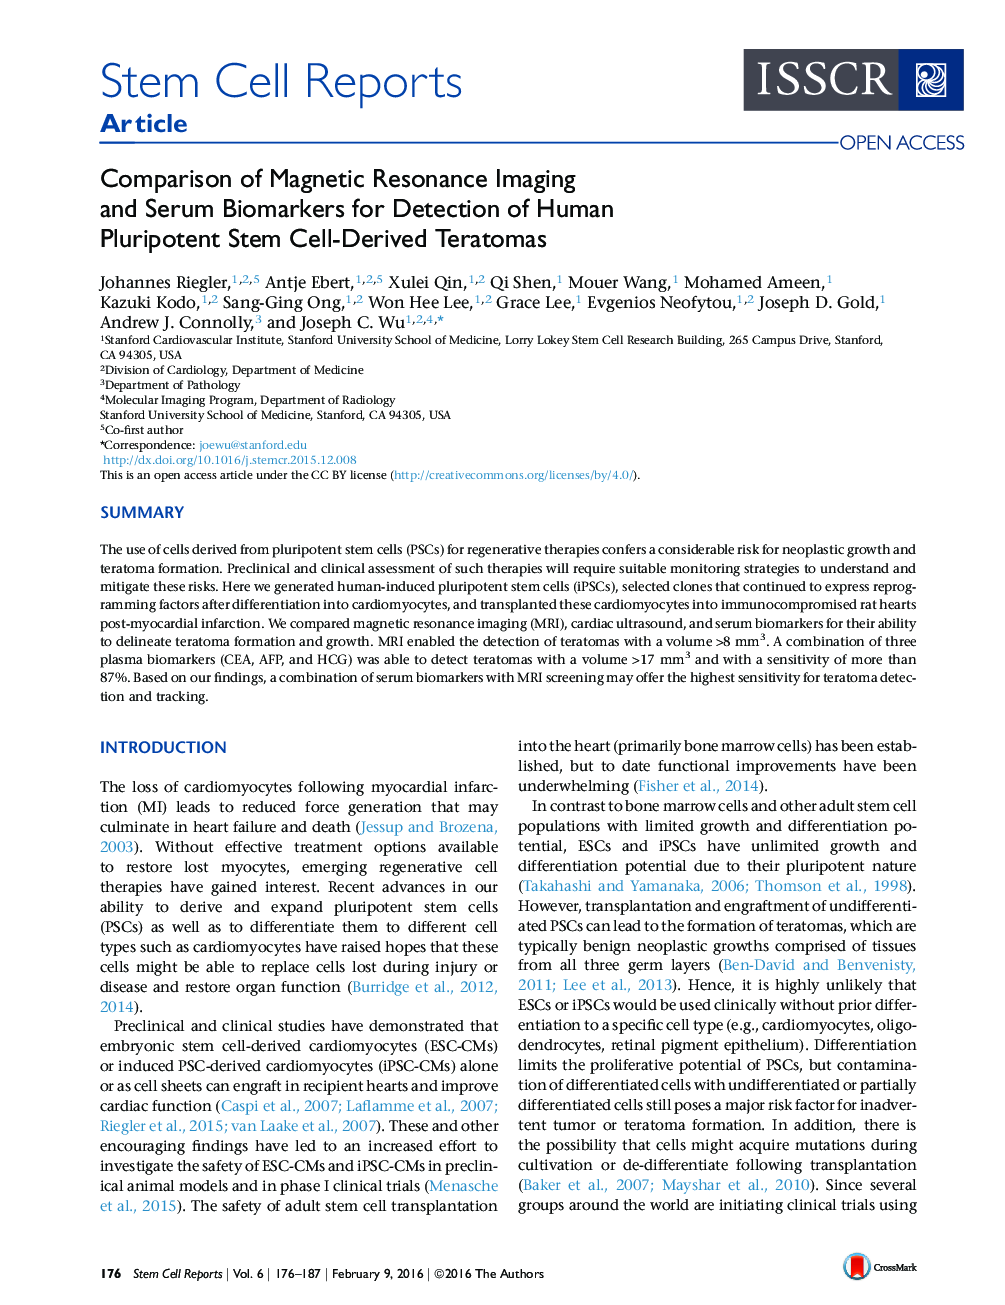 Comparison of Magnetic Resonance Imaging and Serum Biomarkers for Detection of Human Pluripotent Stem Cell-Derived Teratomas 